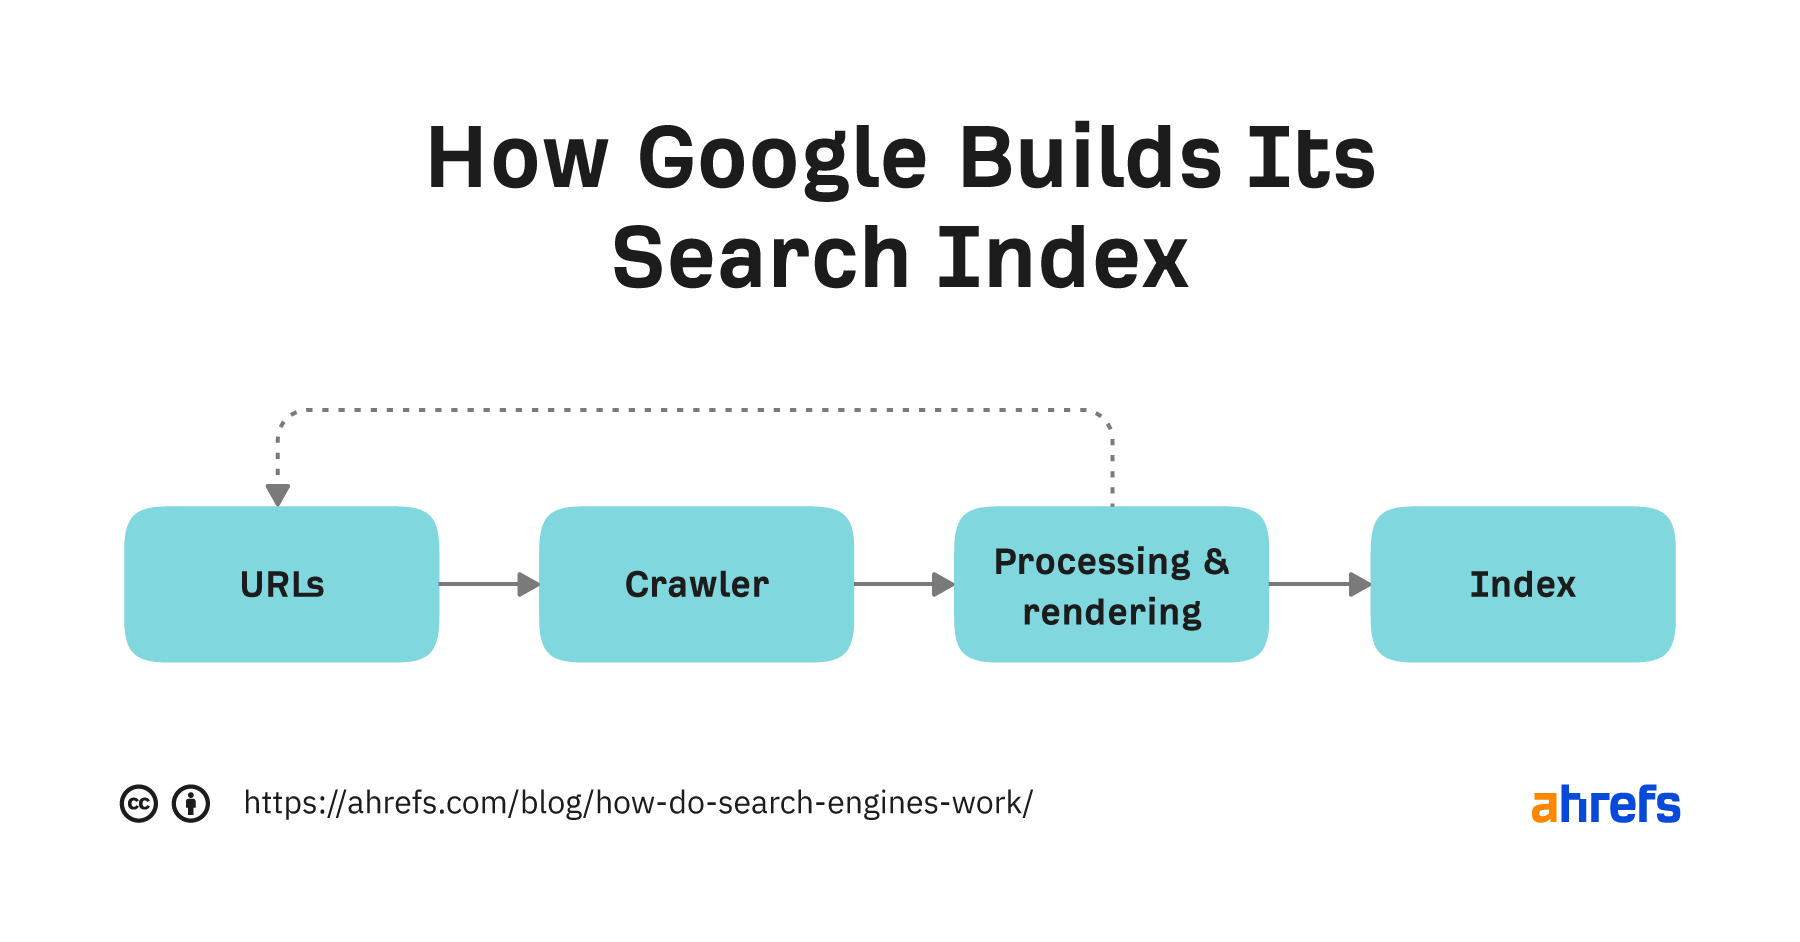 How Google builds its search index